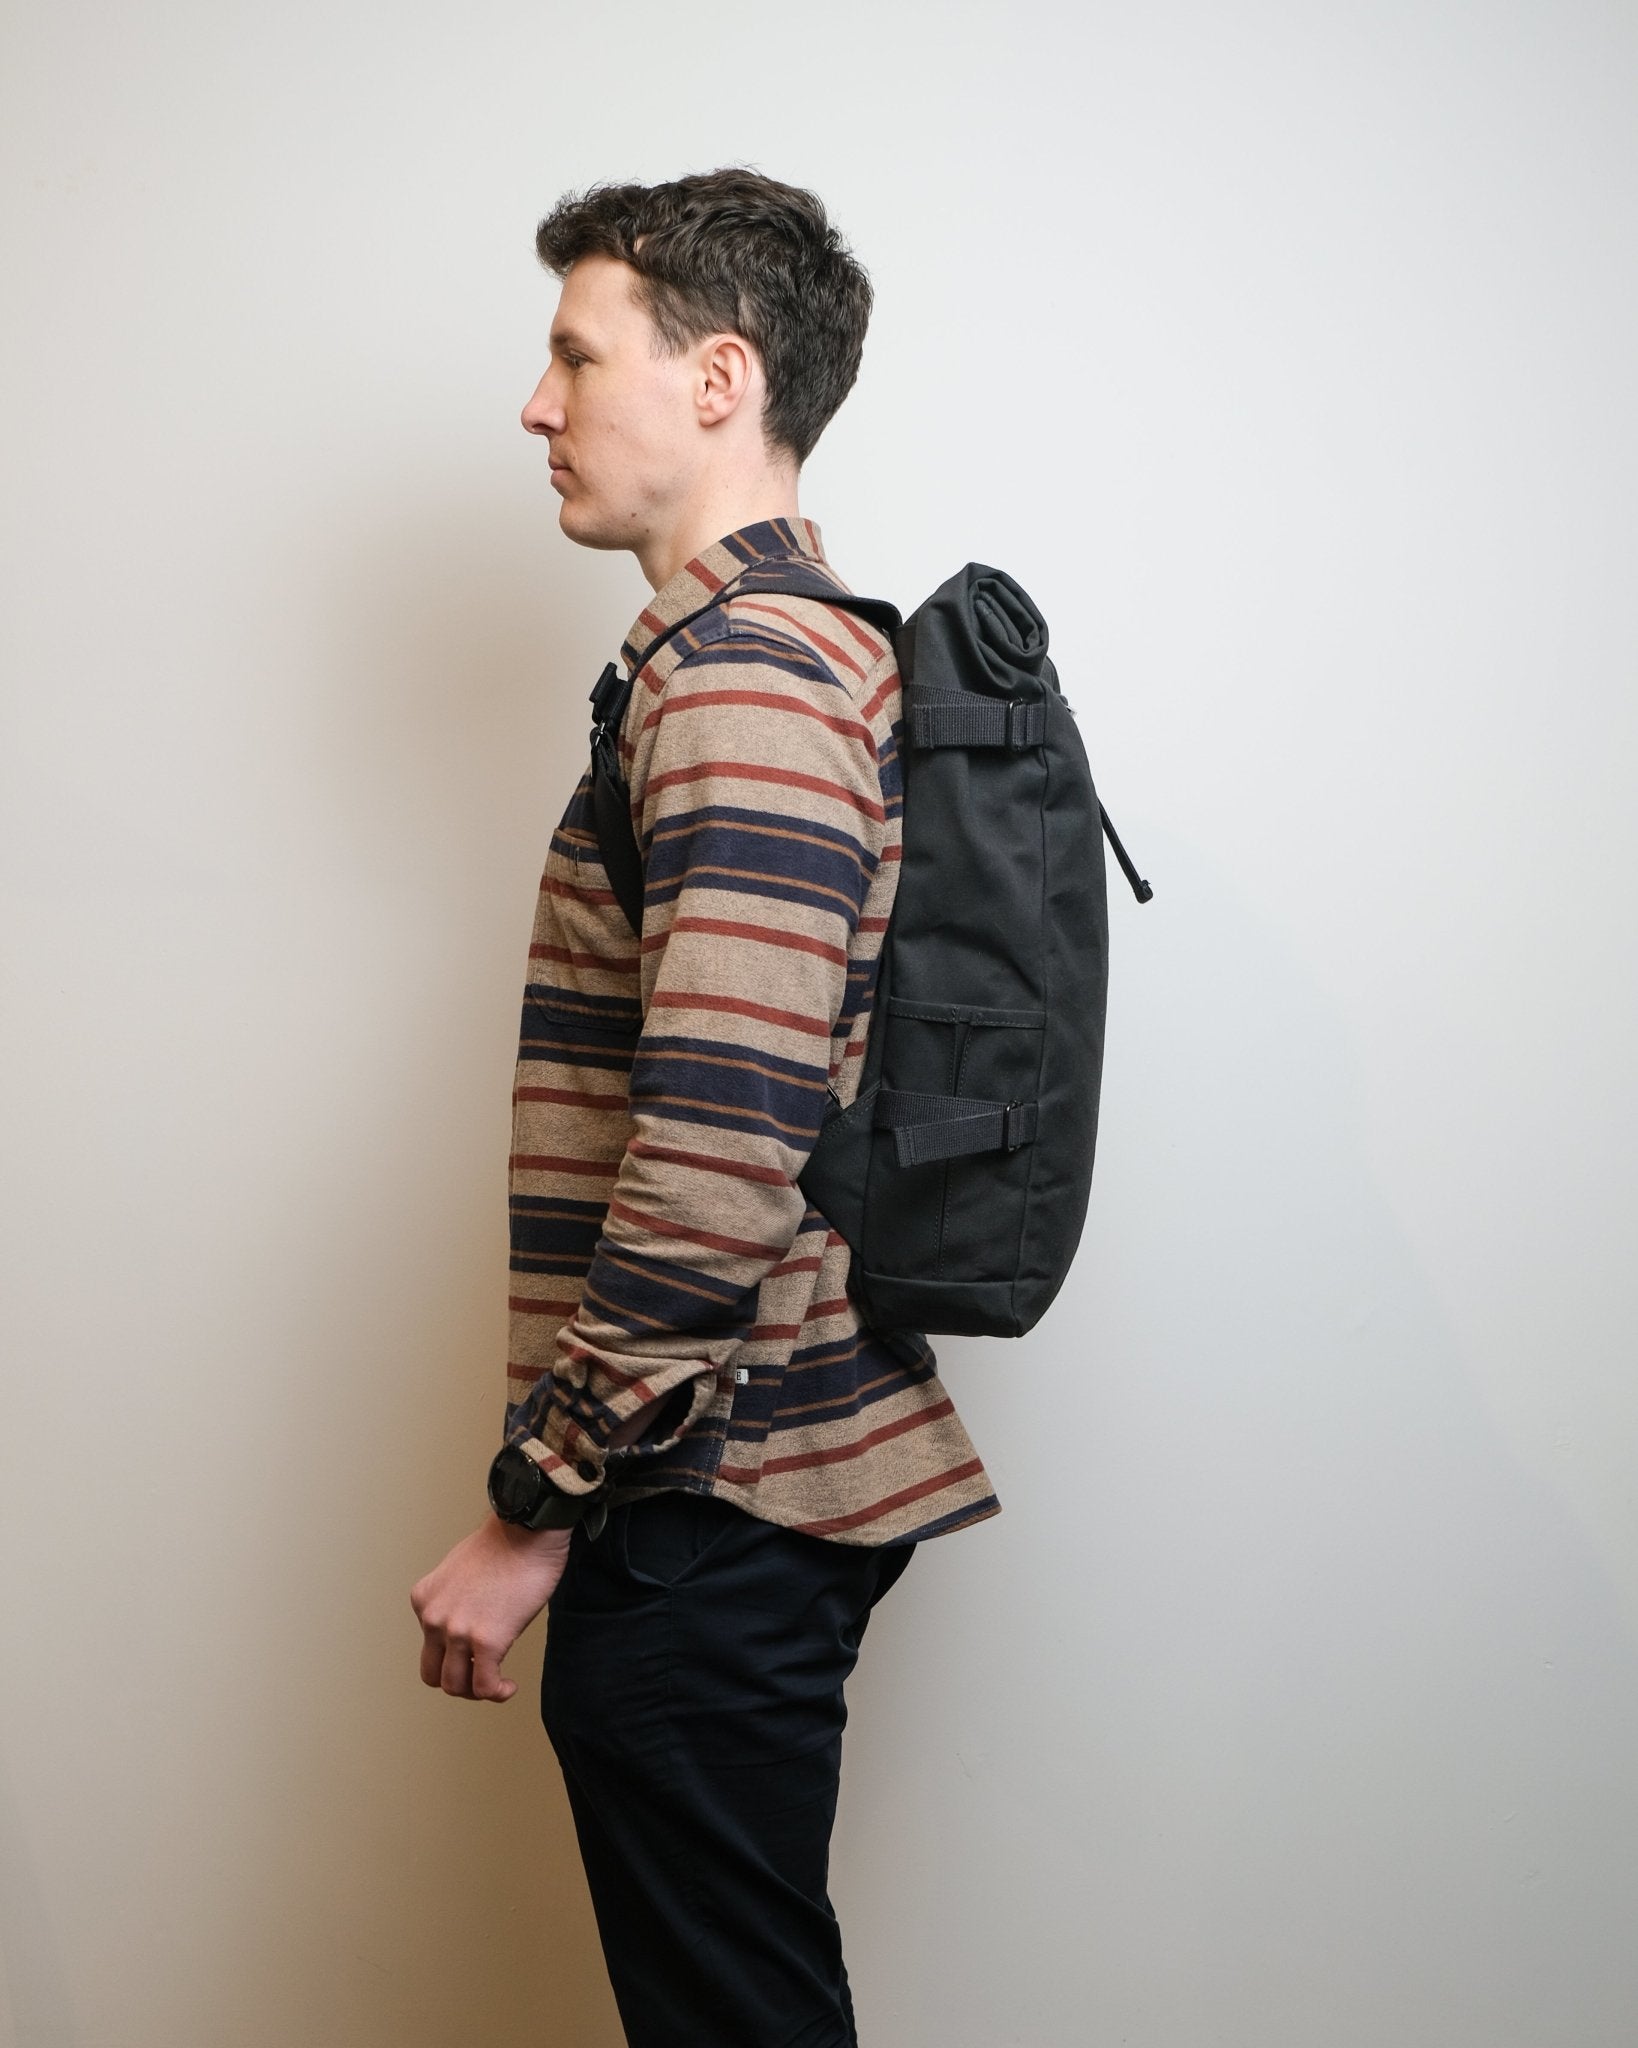 High Capacity Canvas Travel Backpack 23L - Front Pocket